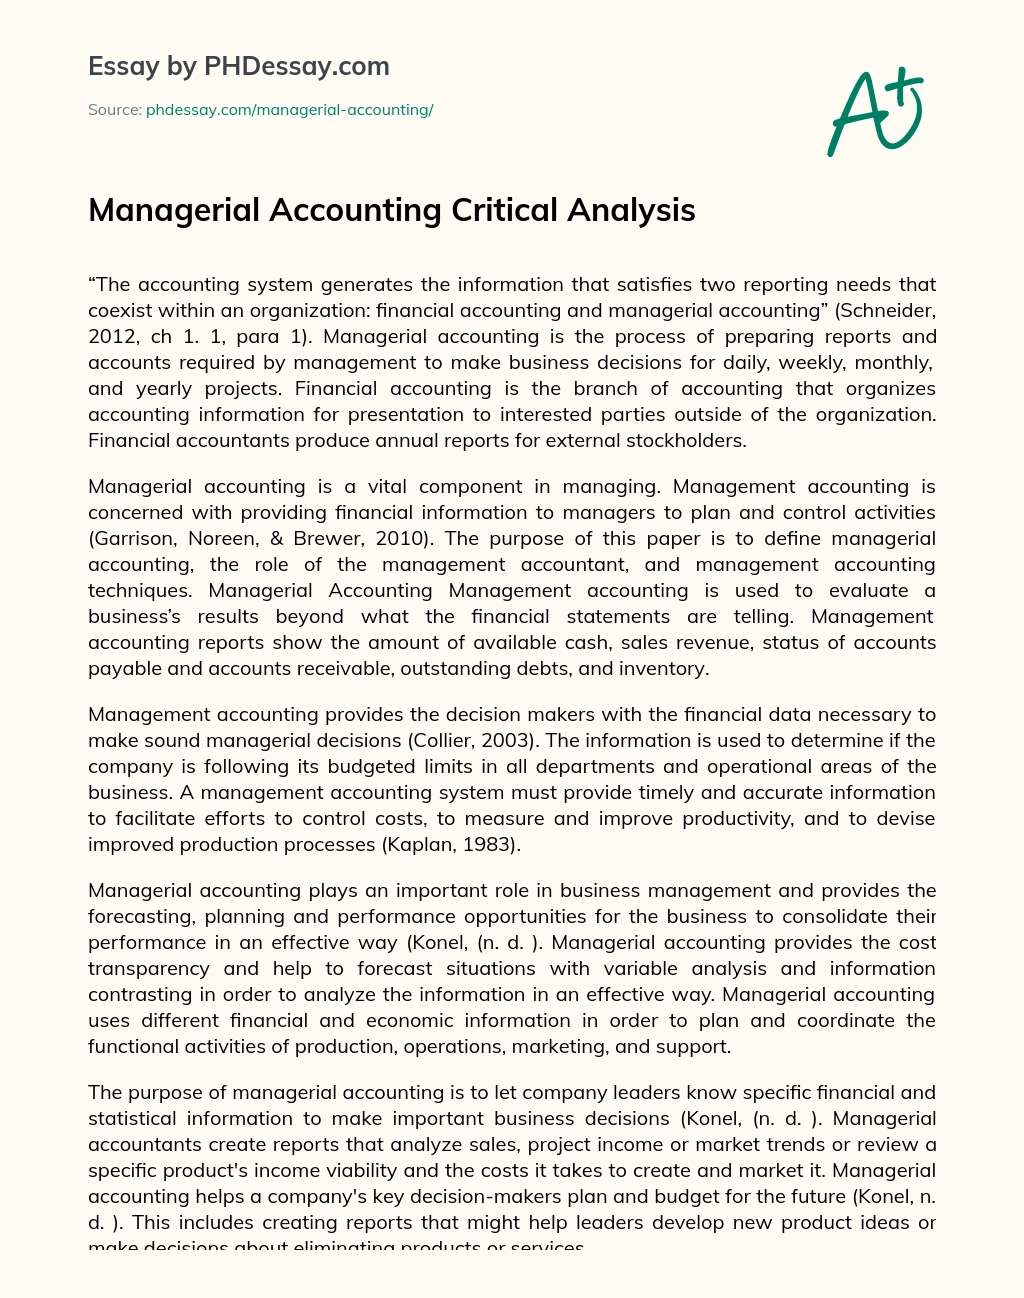 Managerial Accounting Critical Analysis essay